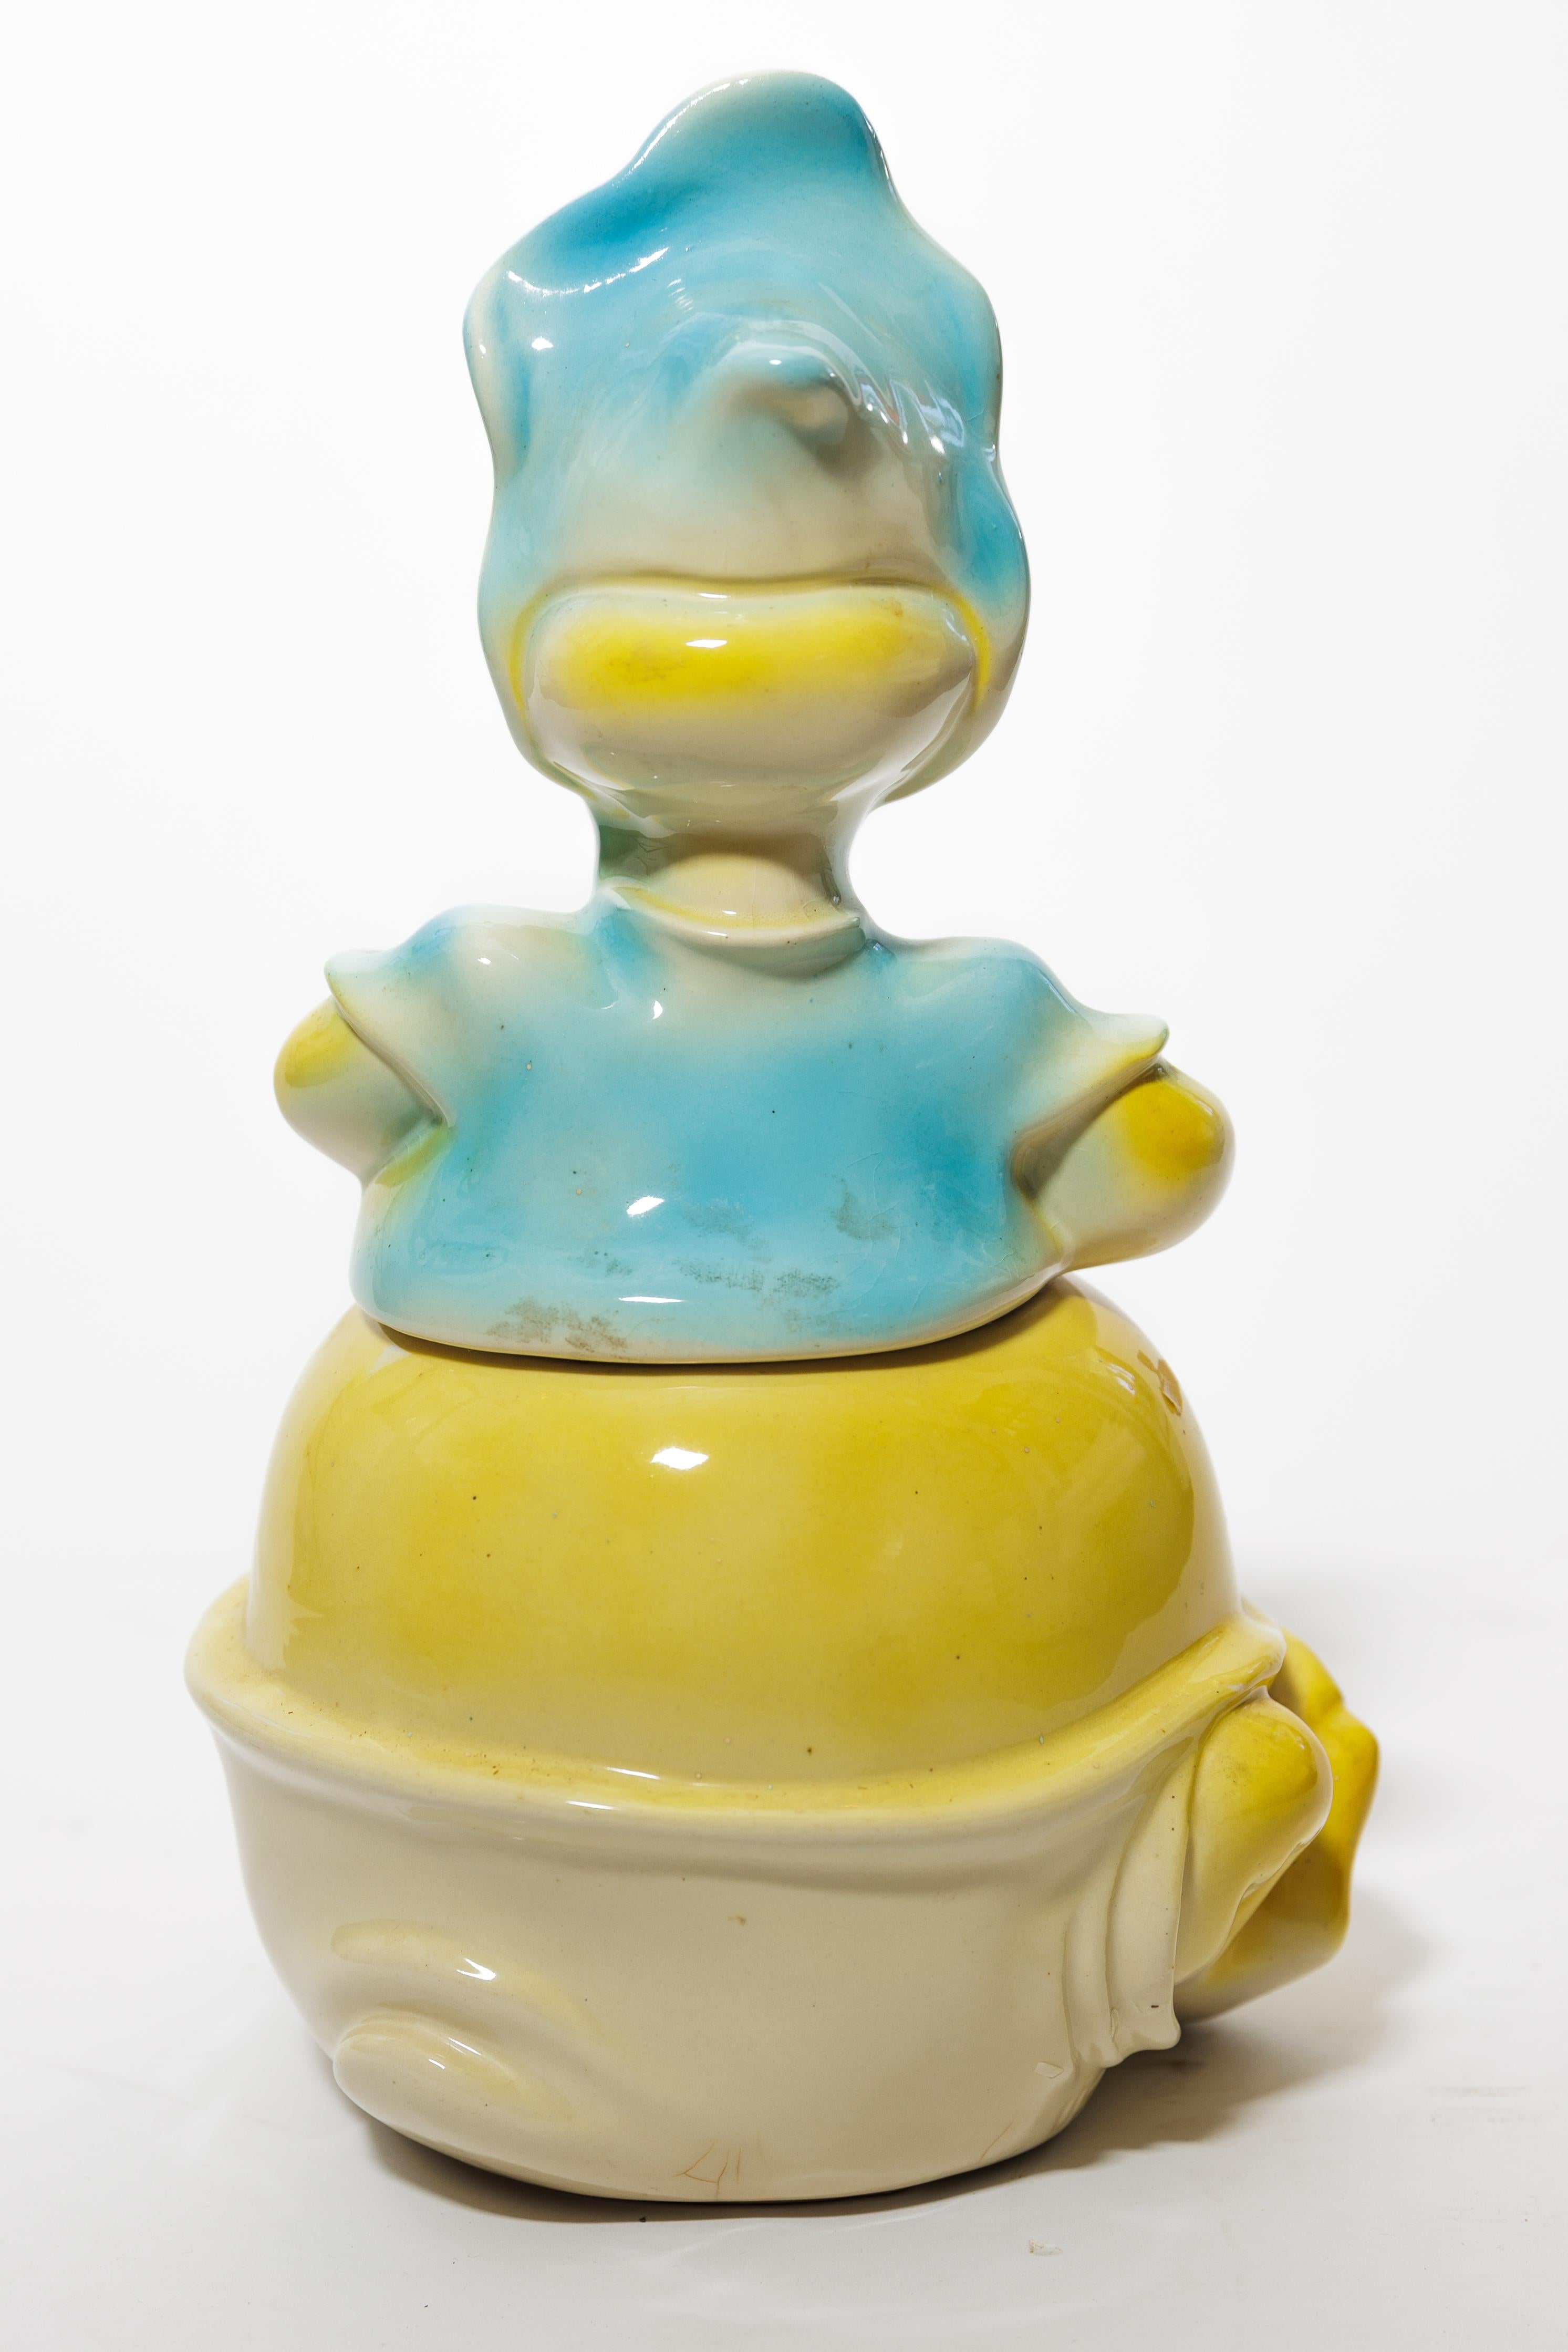 Baby Huey is a rare find in a cookie jar.  He was a famous animated
cartoon character.  Do you remember him?